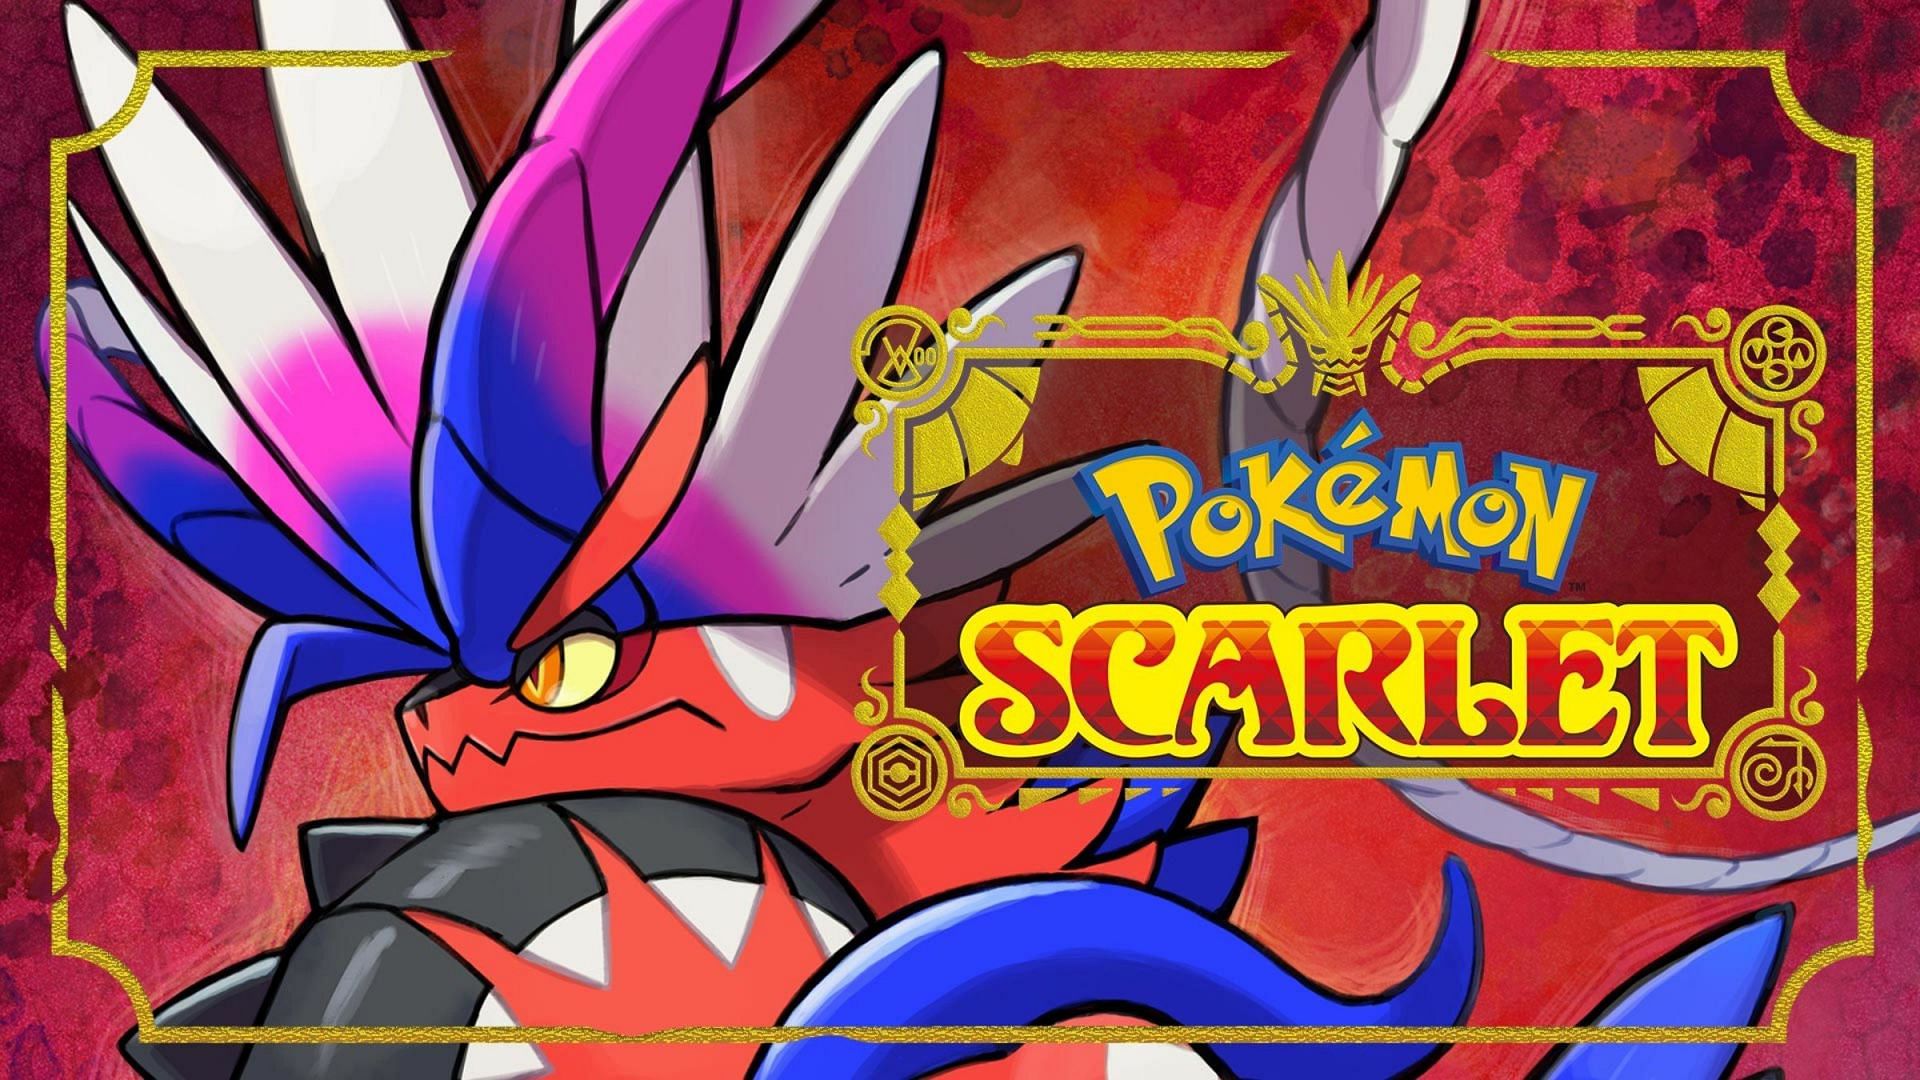 All of the Version Exclusives in 'Pokémon Scarlet' and 'Violet